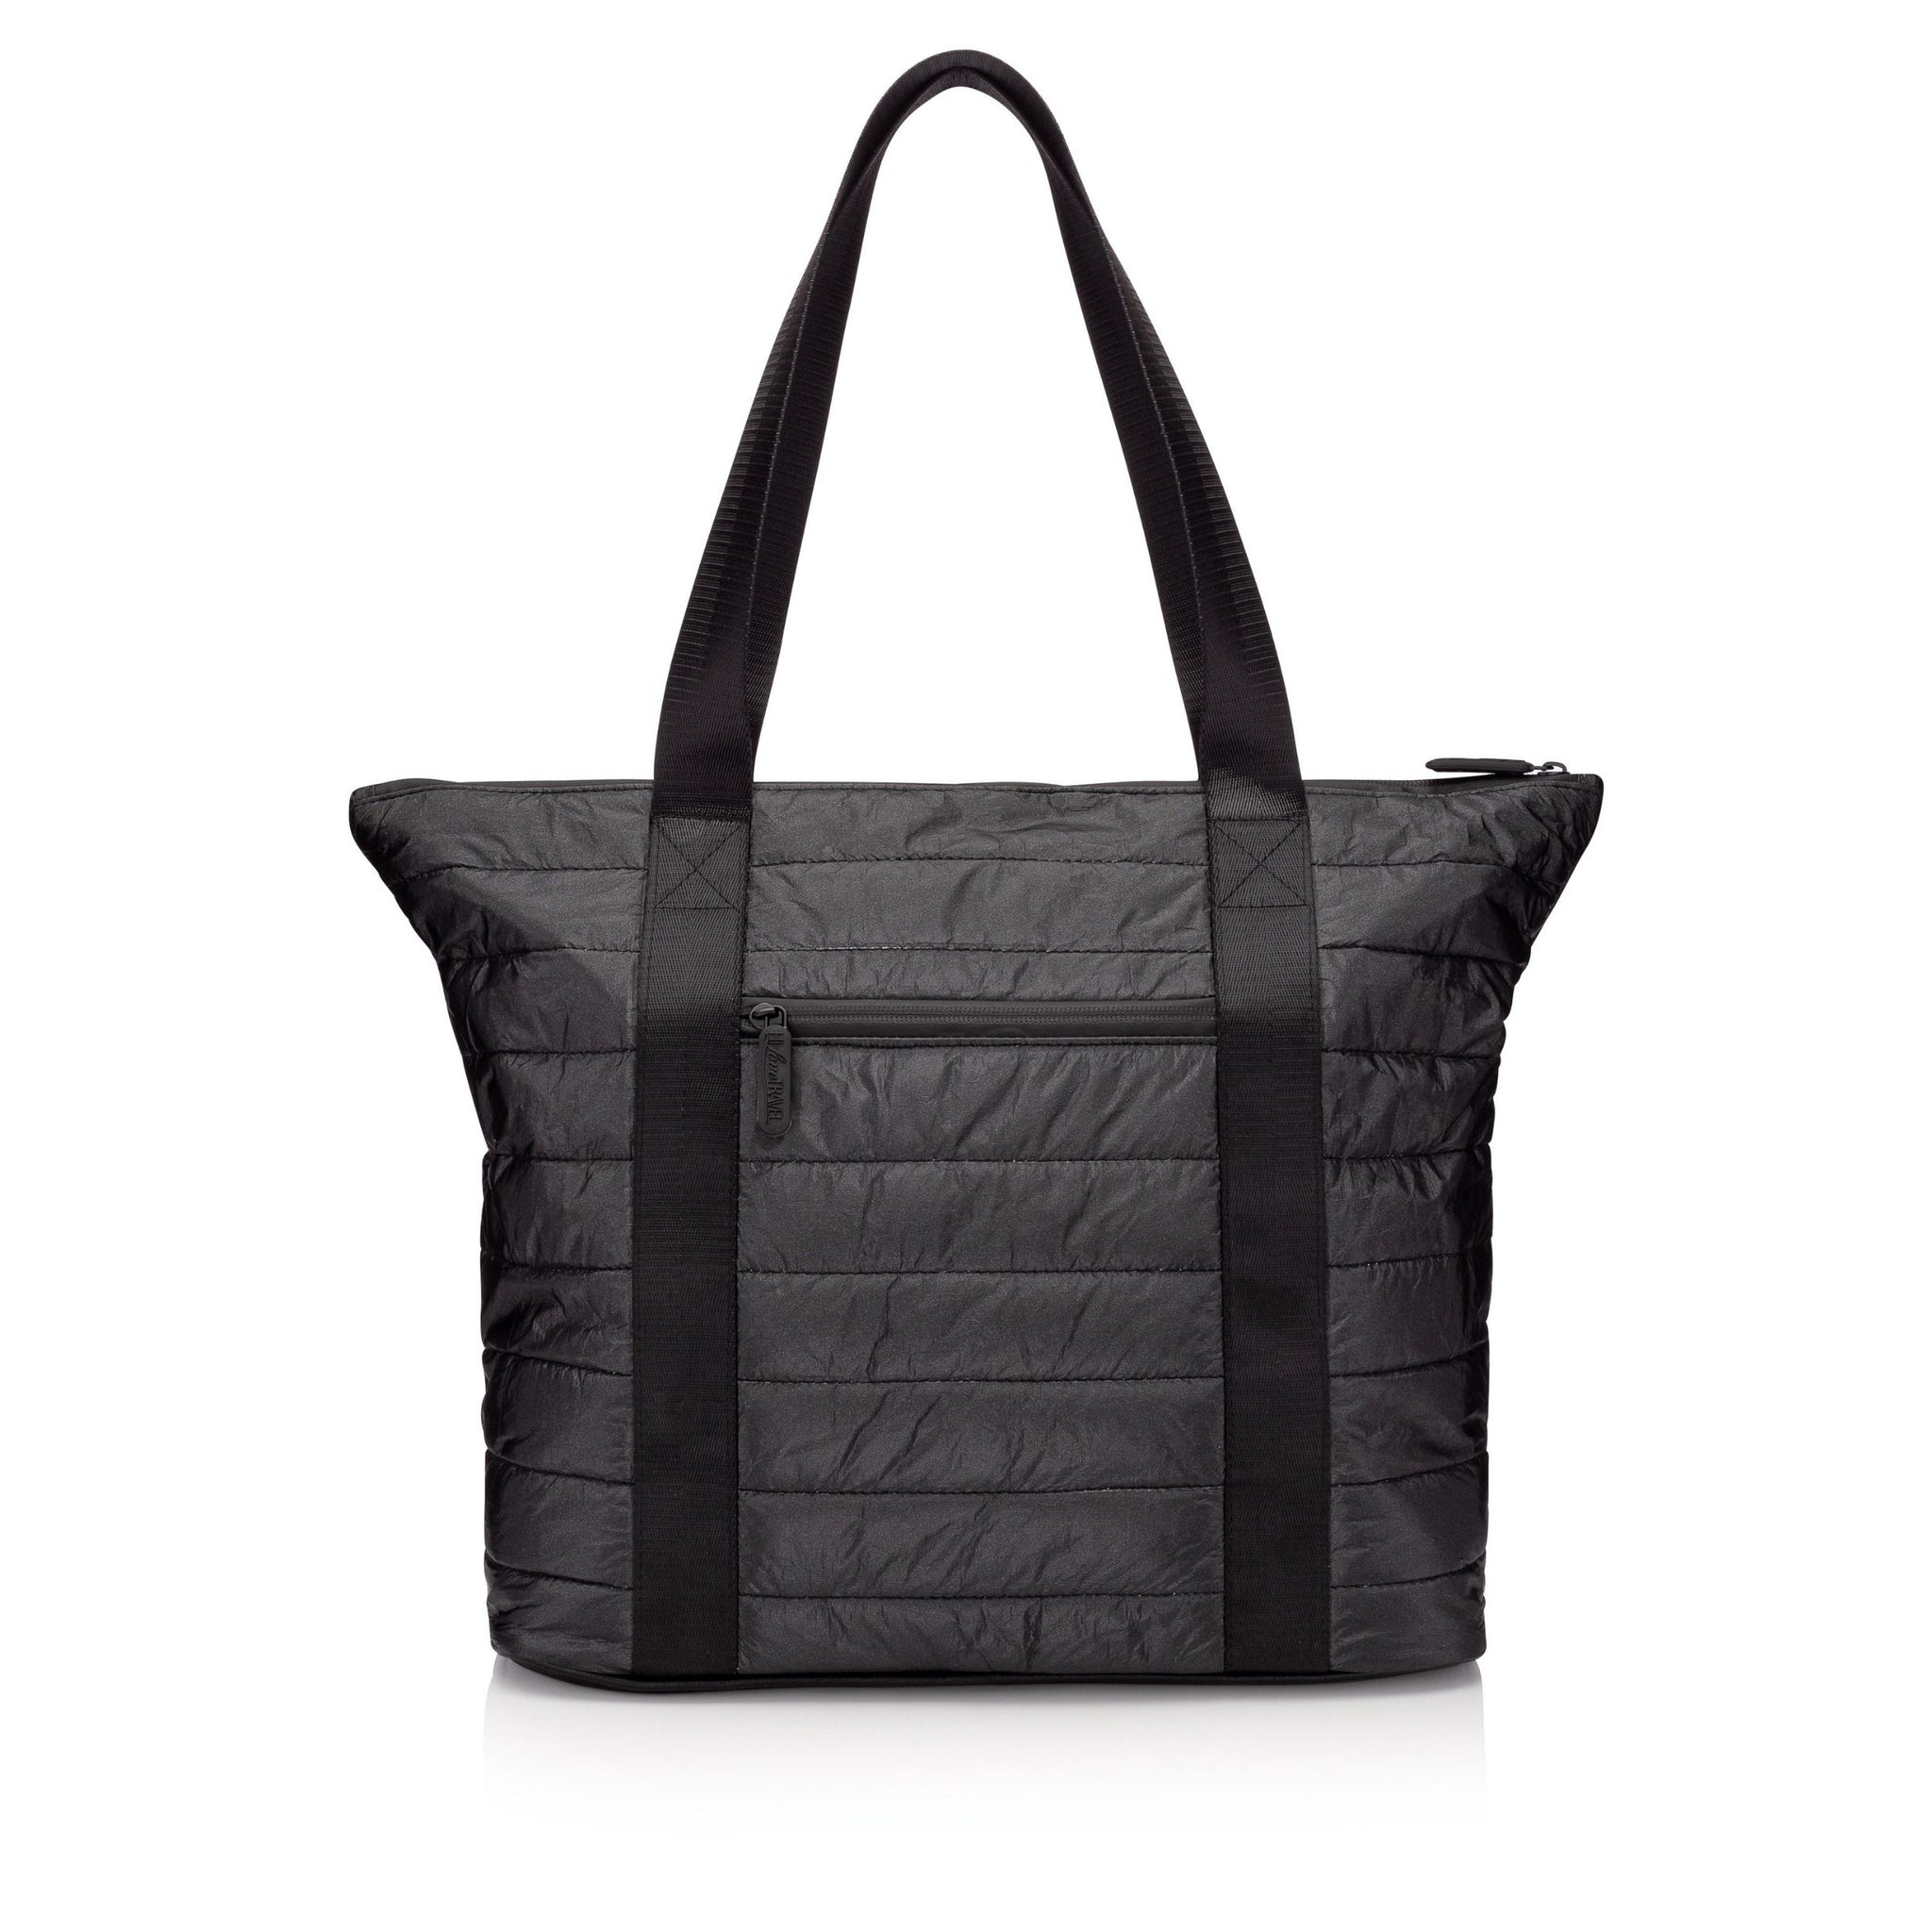 Puffer Tote Bag with Zipper Pockets in Shimmer Black